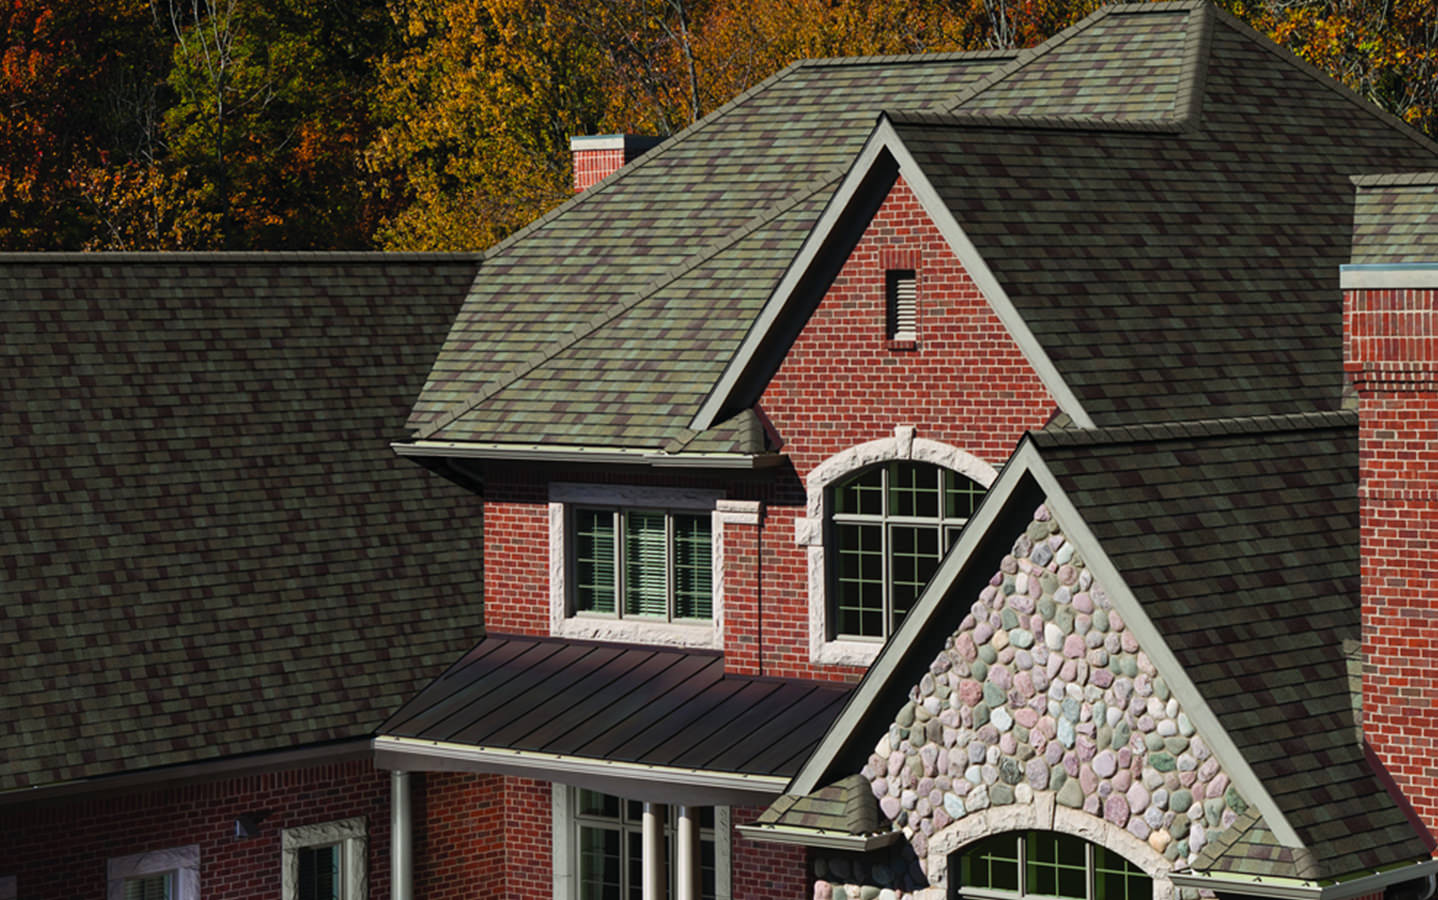 Abraham Roofing & Siding Images